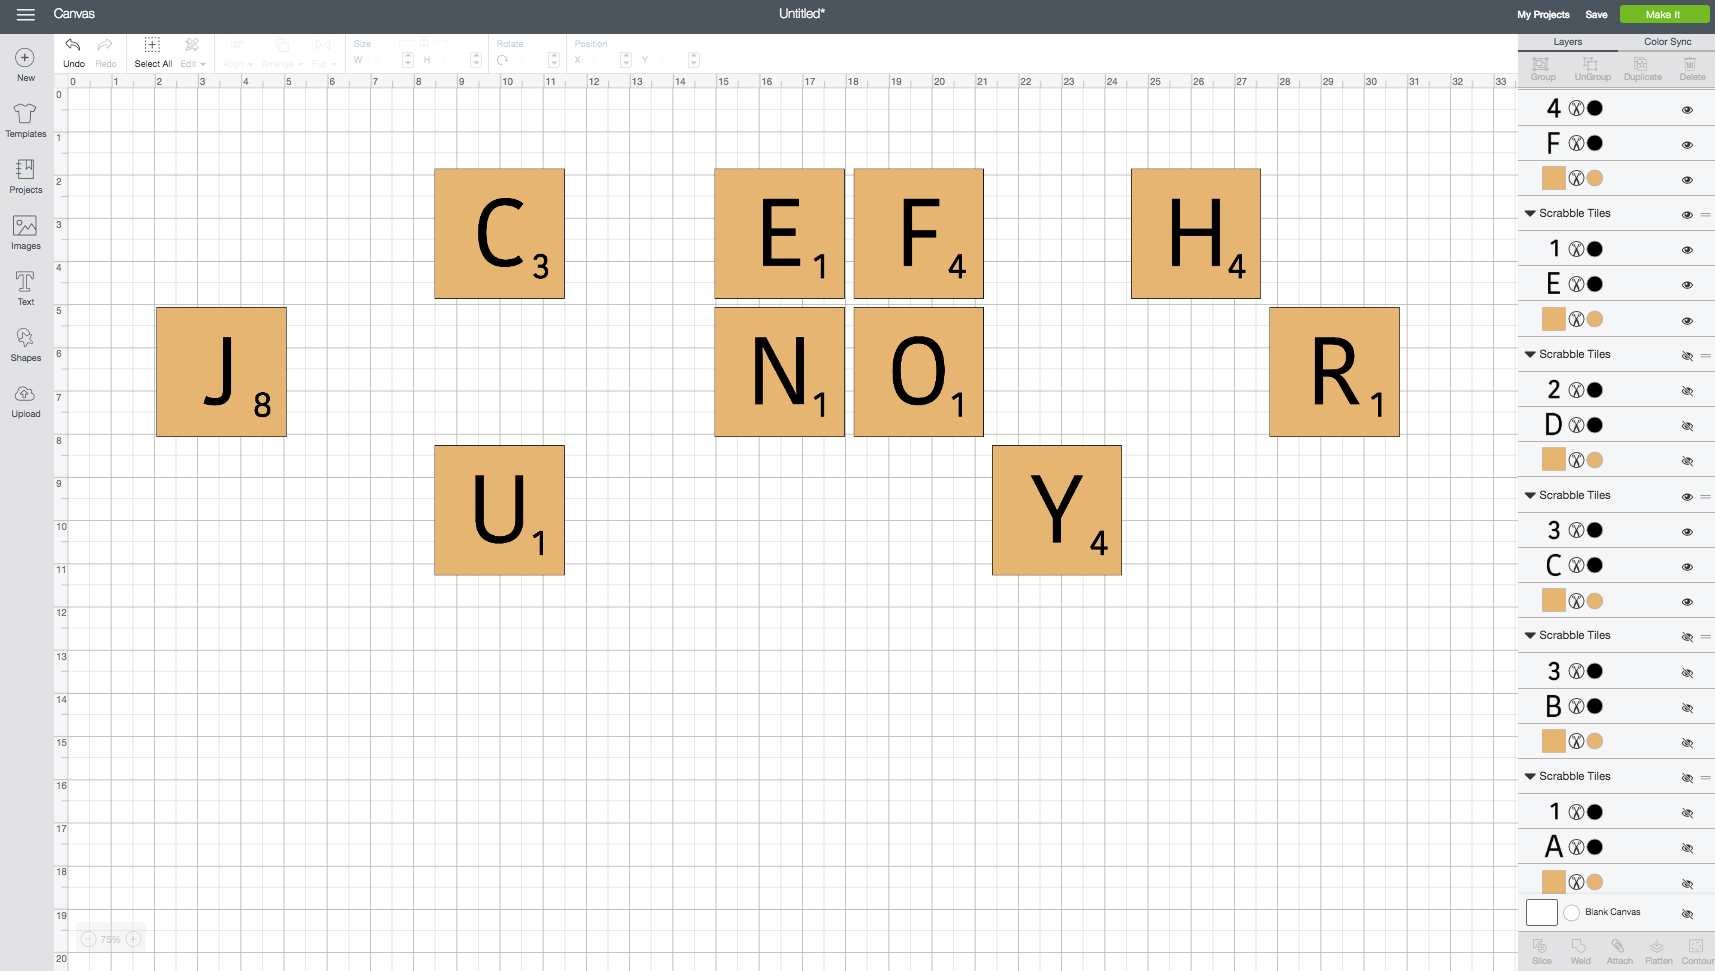 In Cricut Design Space, images of letters just like those used in the game of Scrabble 